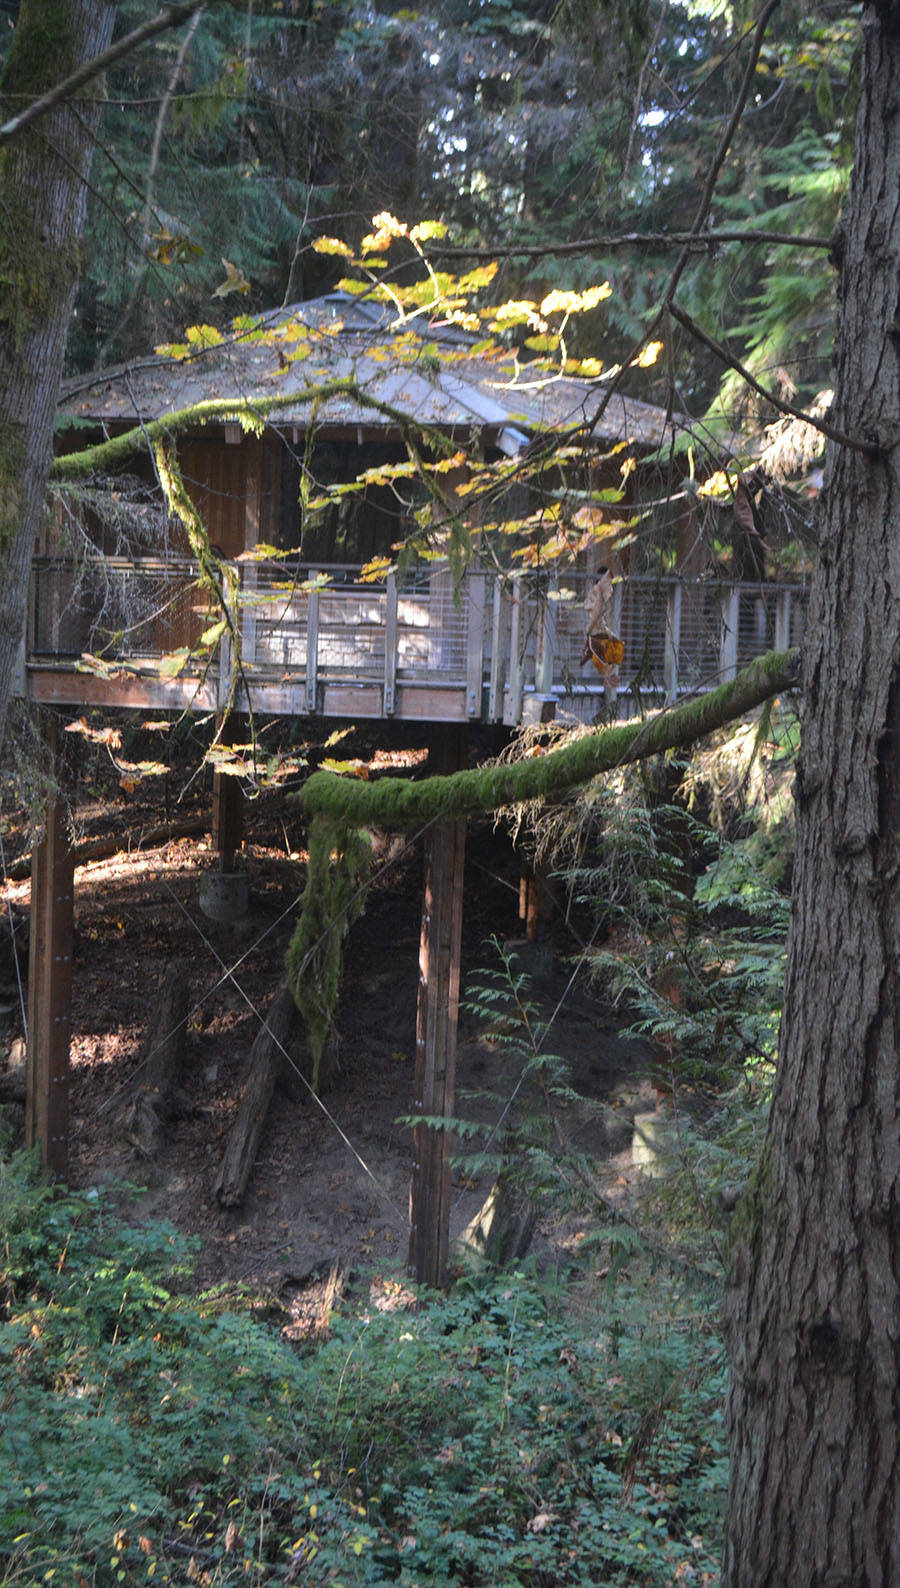 The treehouse allows students to look up and down a gully.